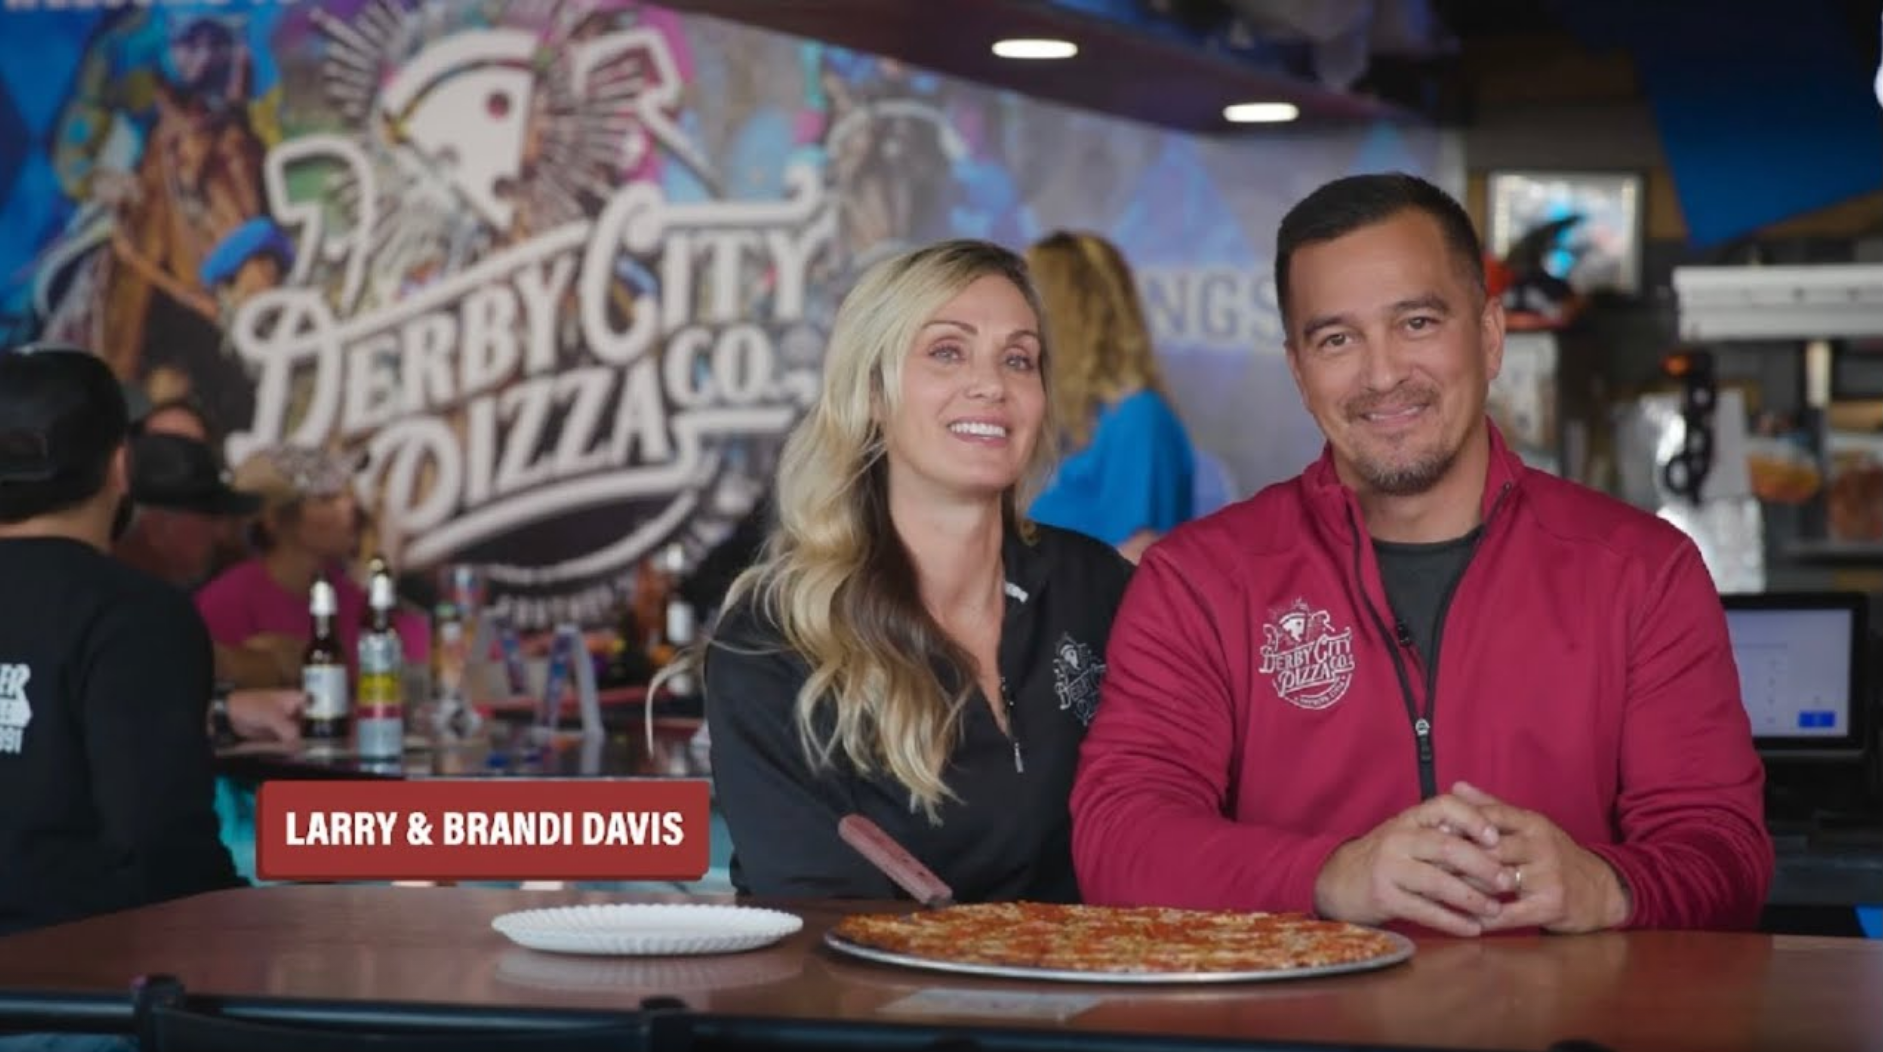 Welcome to Derby City Pizza Video Thumbnail